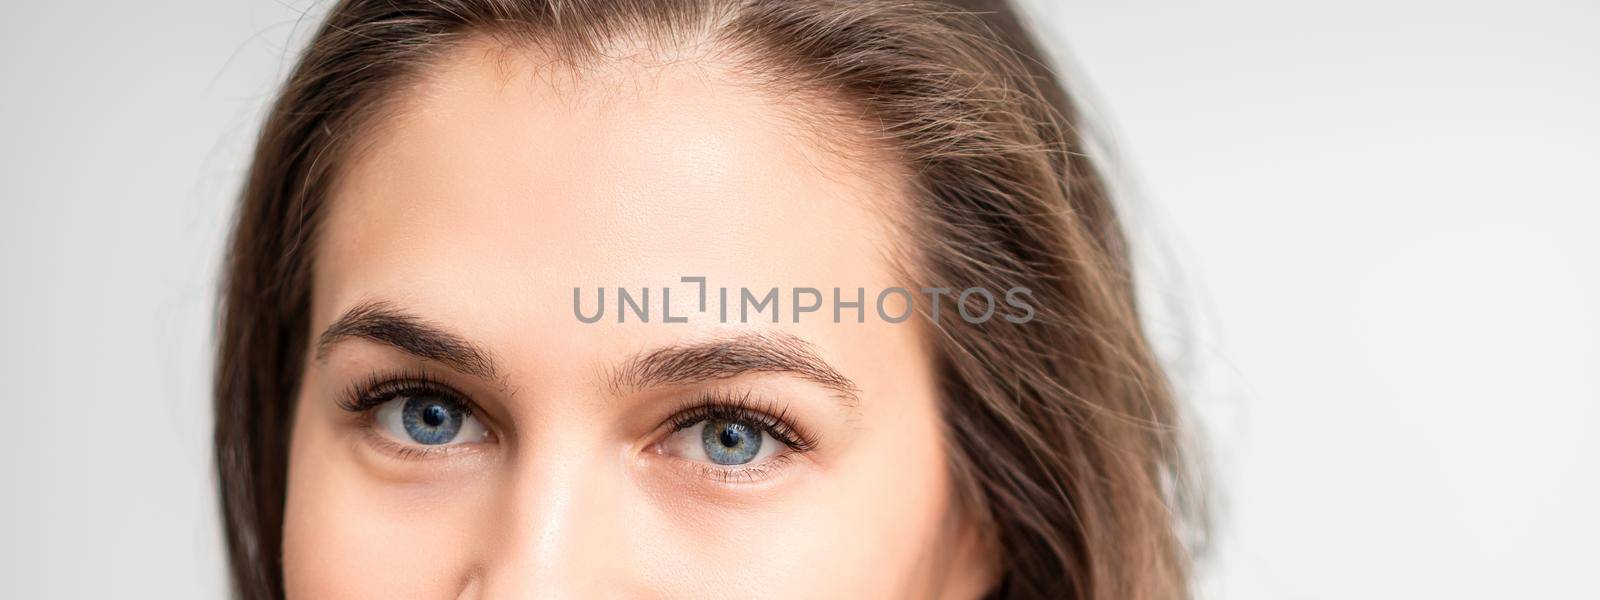 Half face portrait of young caucasian woman with natural make up and eyelash extensions looking at camera on white background